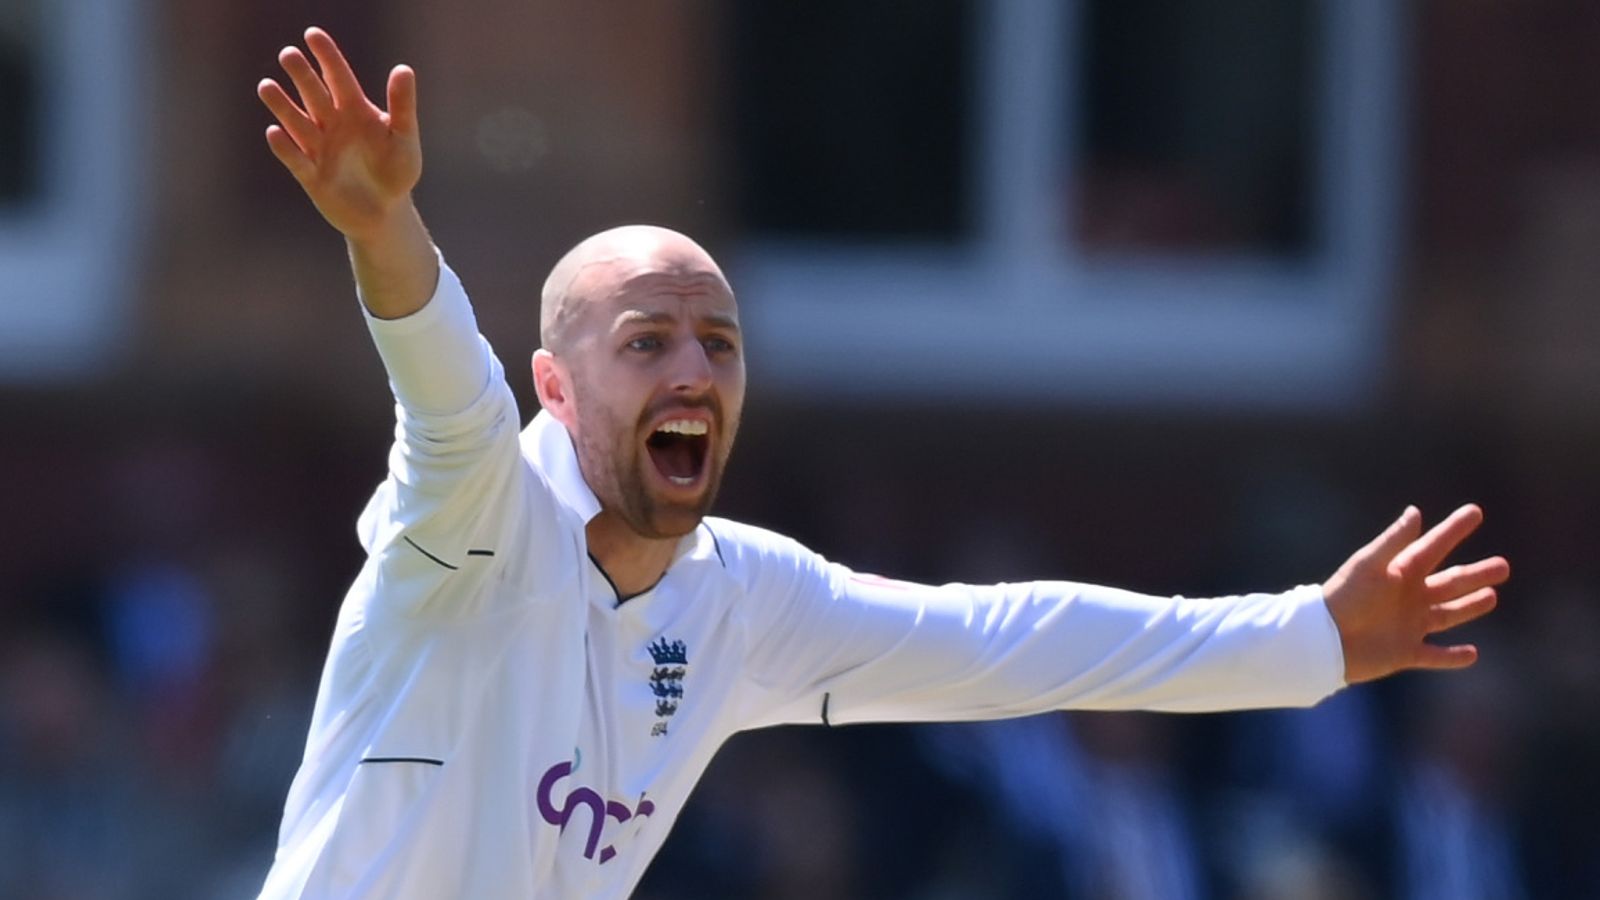 The Ashes: Jack Leach ruled out of series for England with lower back stress fracture | Cricket News